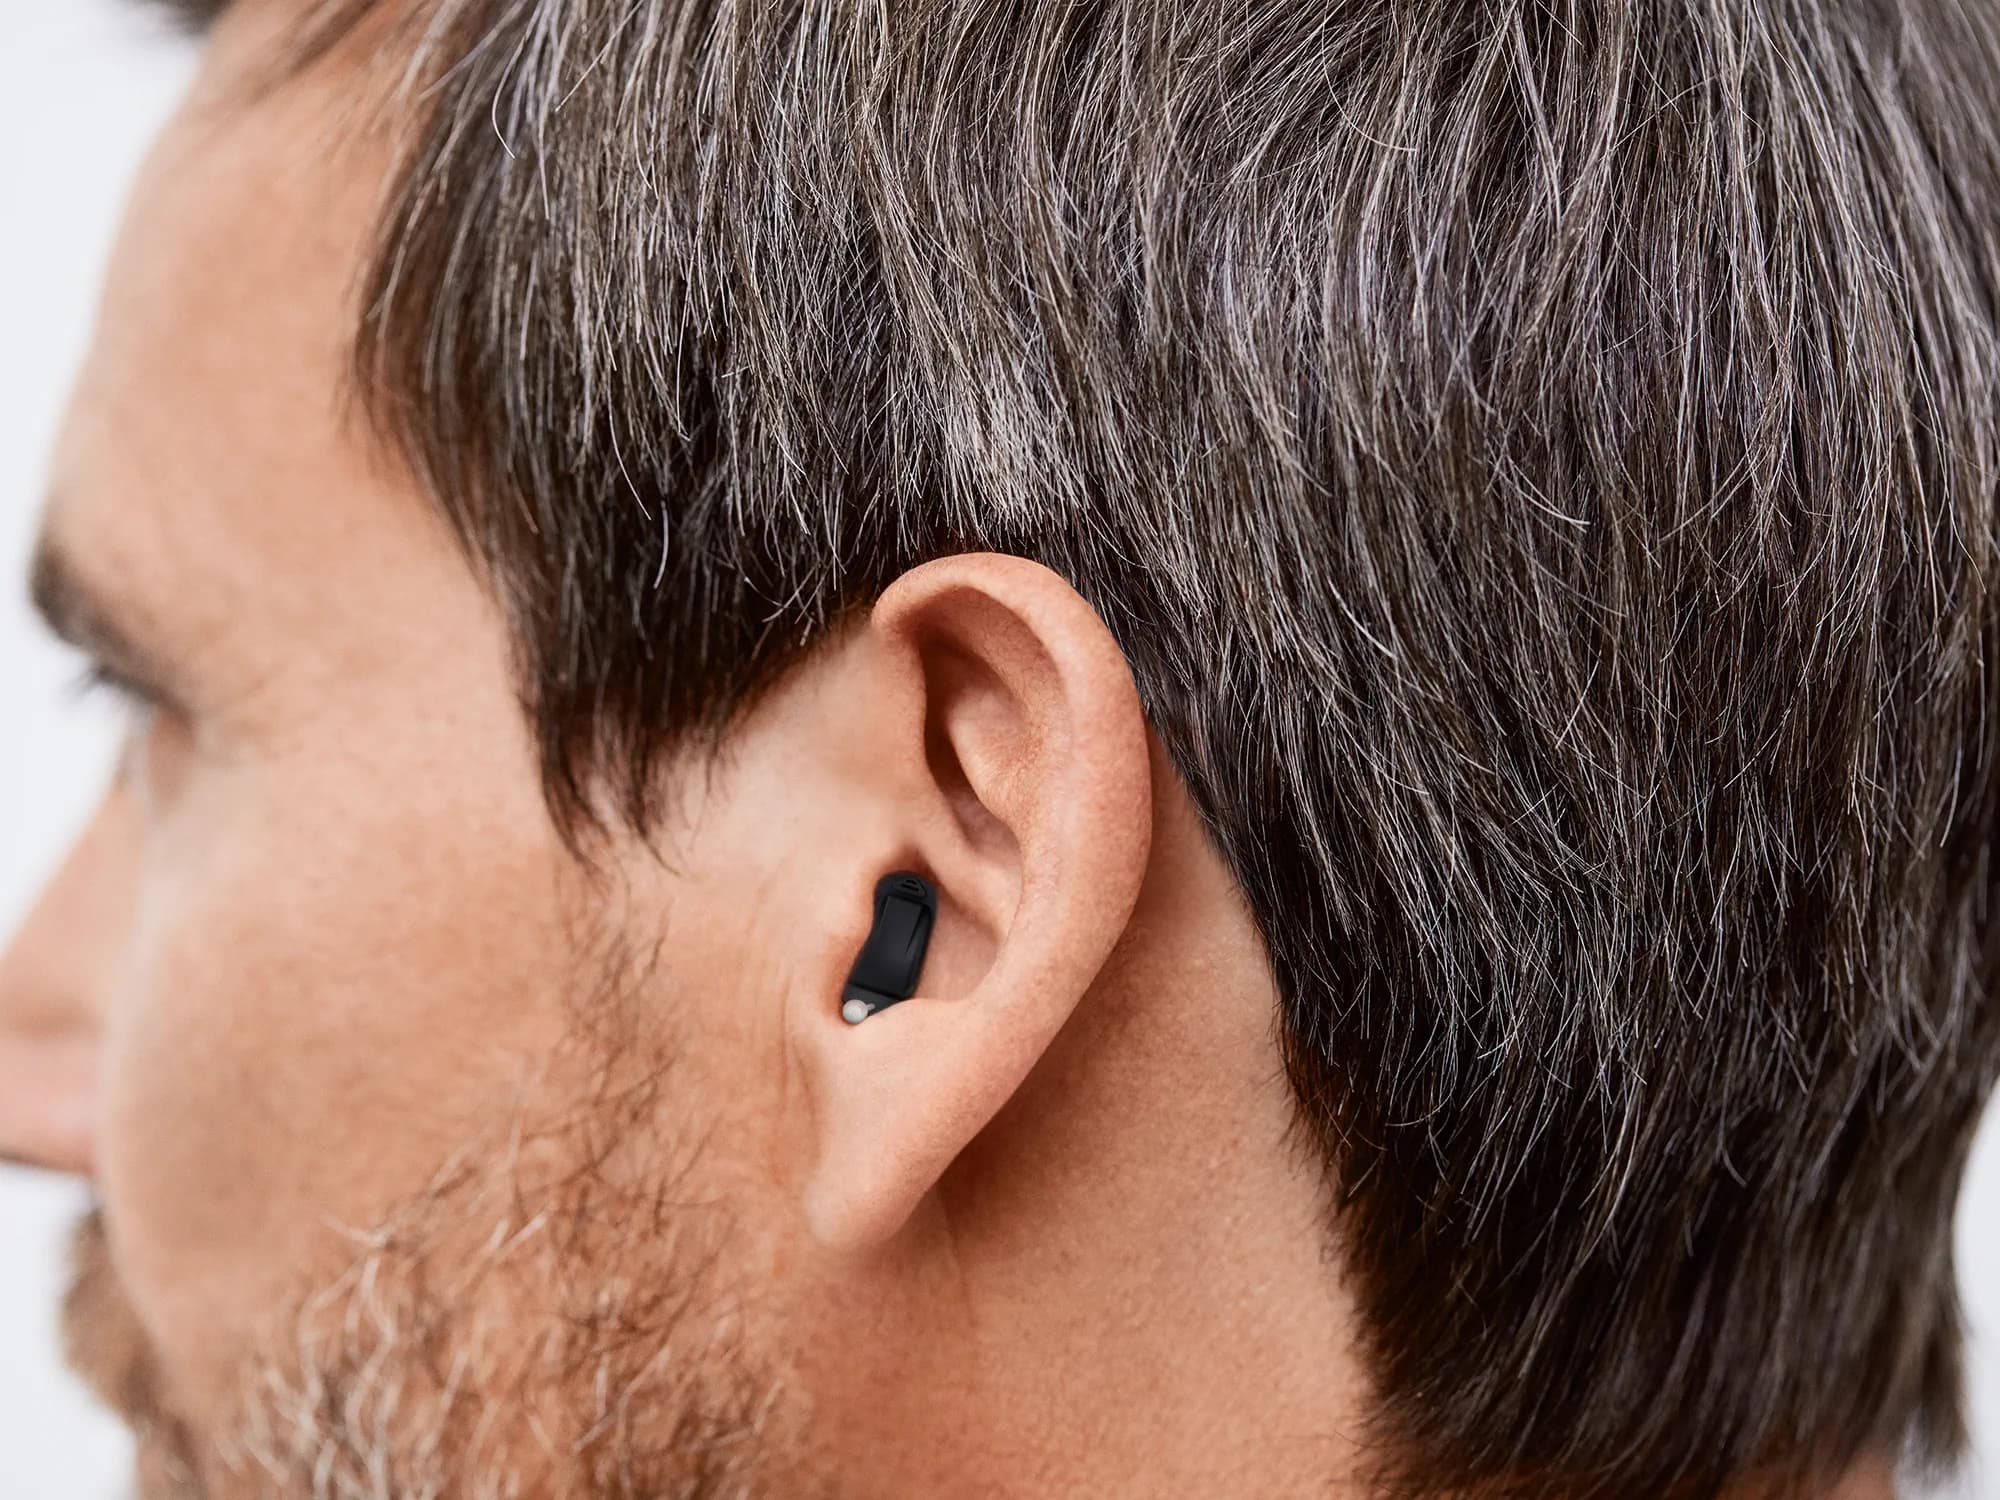 Hearing aids are tiny and often invisible when wearing them